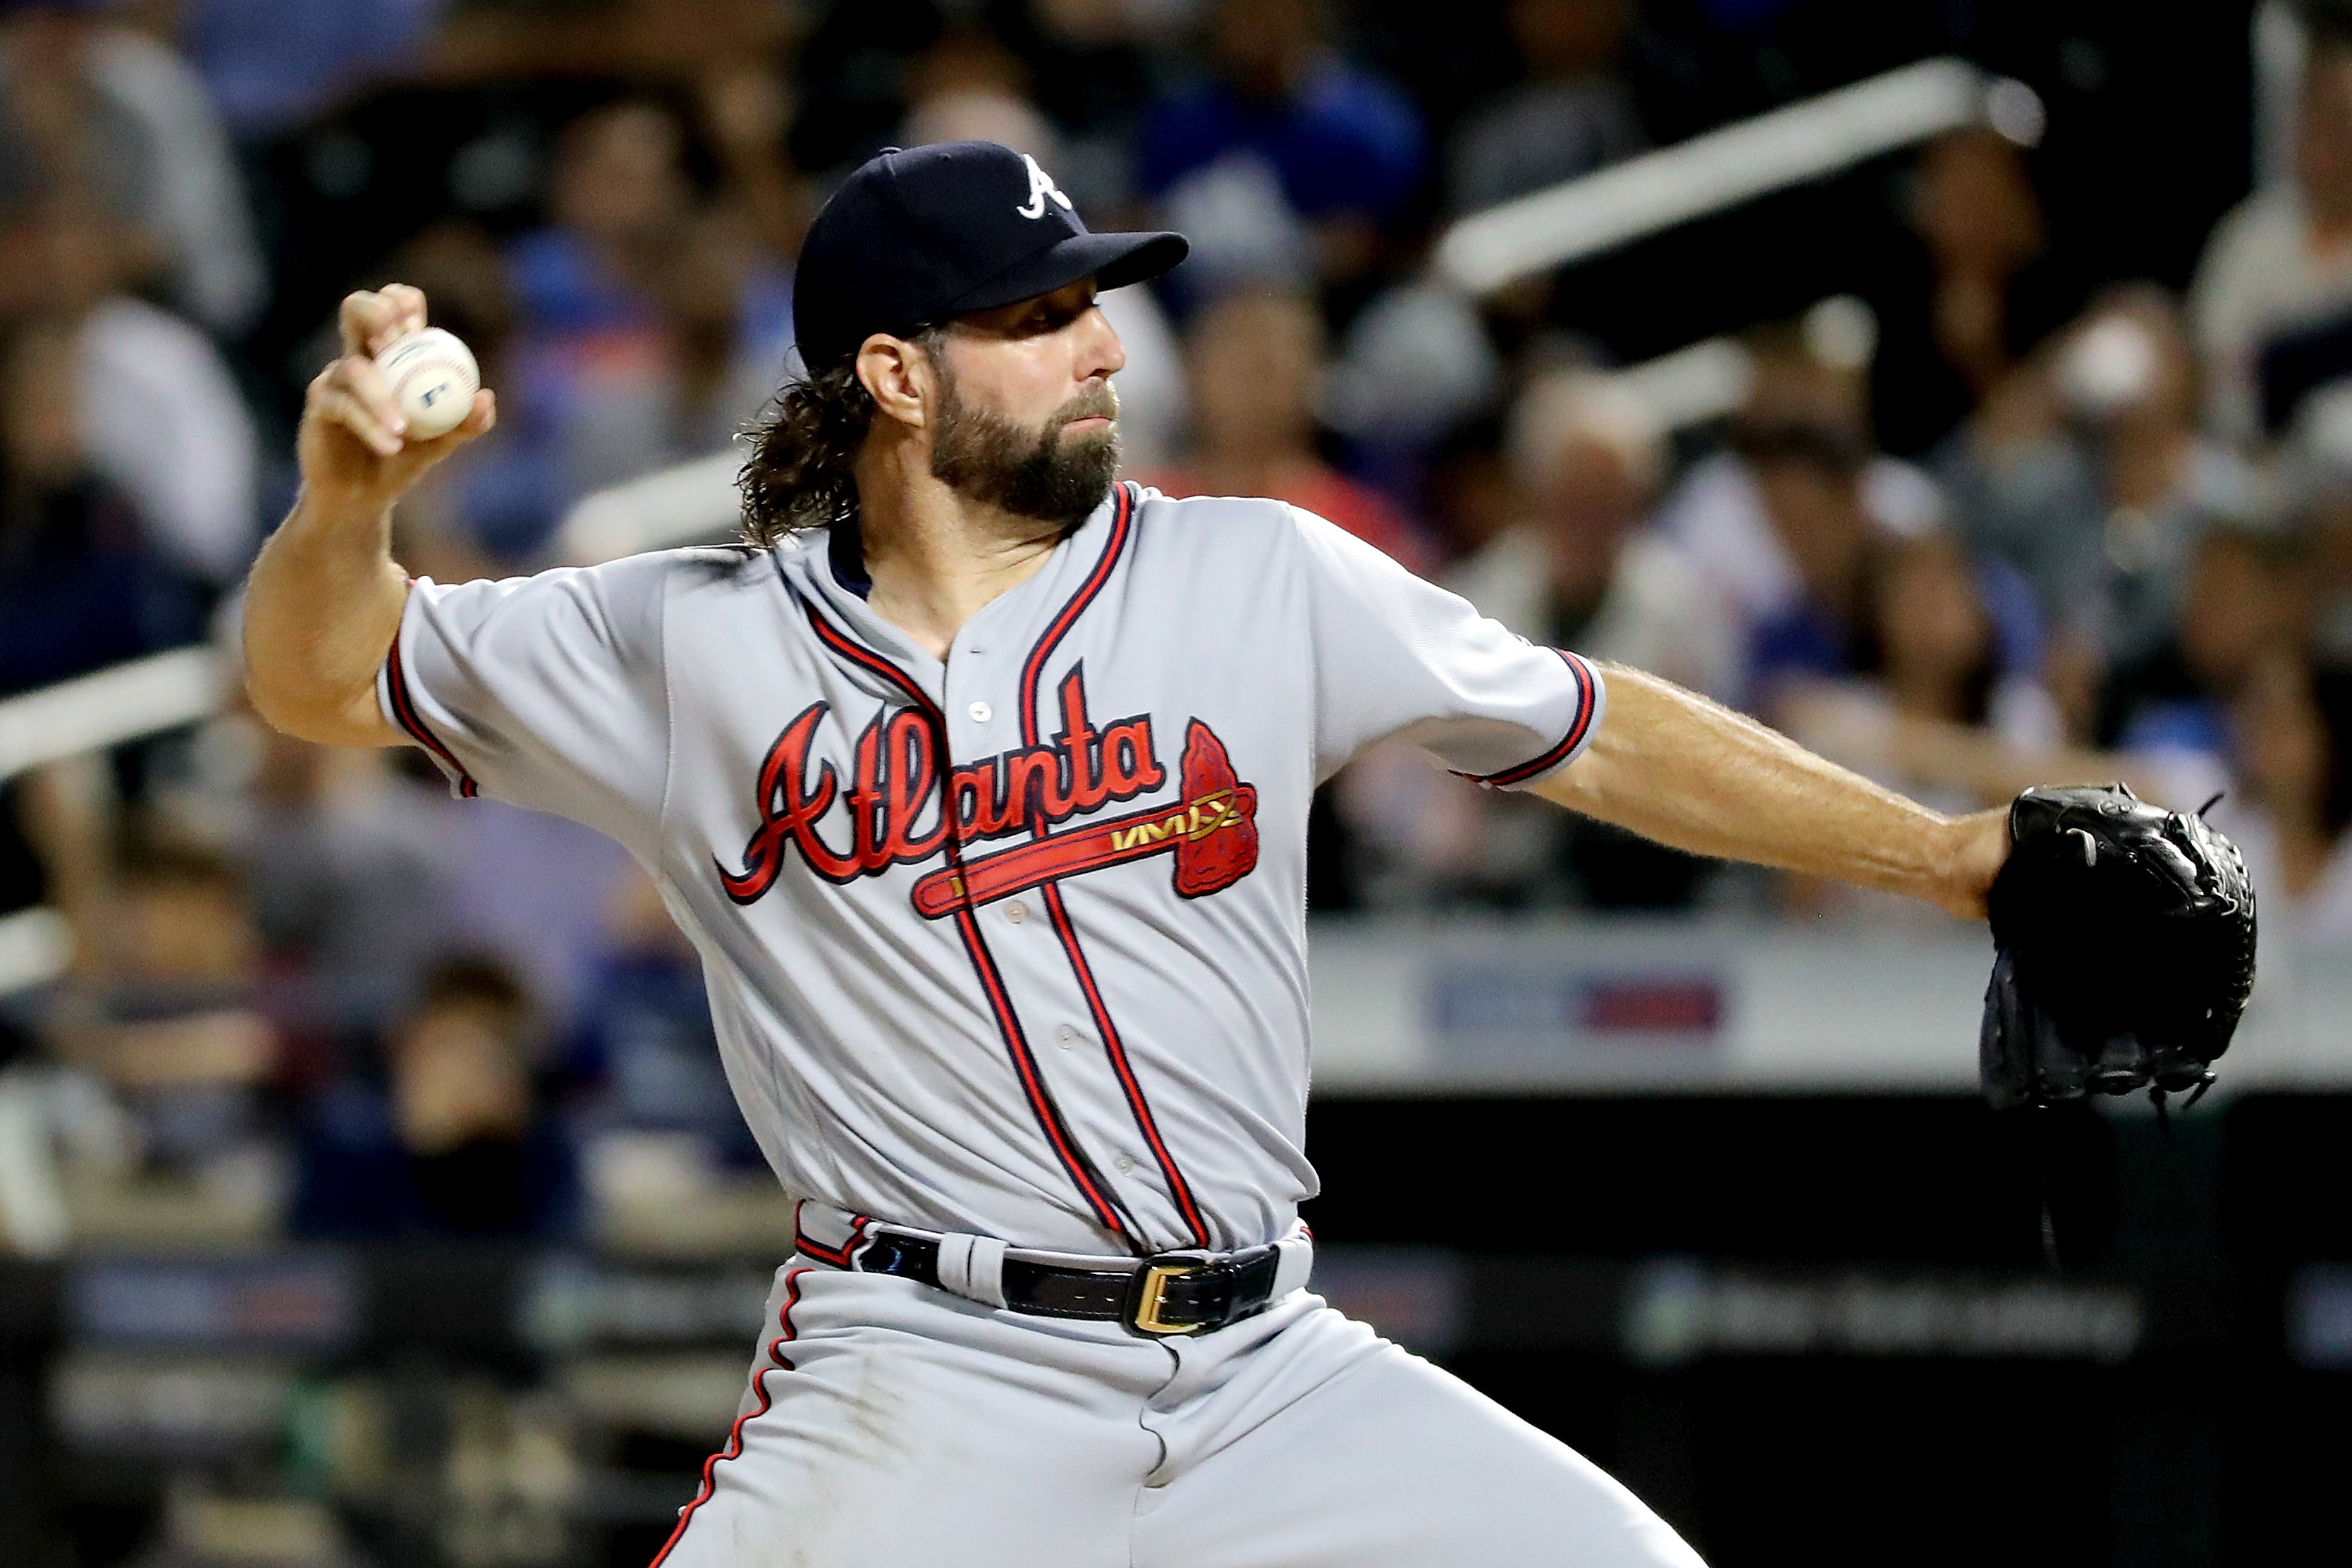 R.A. Dickey discusses season with Braves and retirement decision